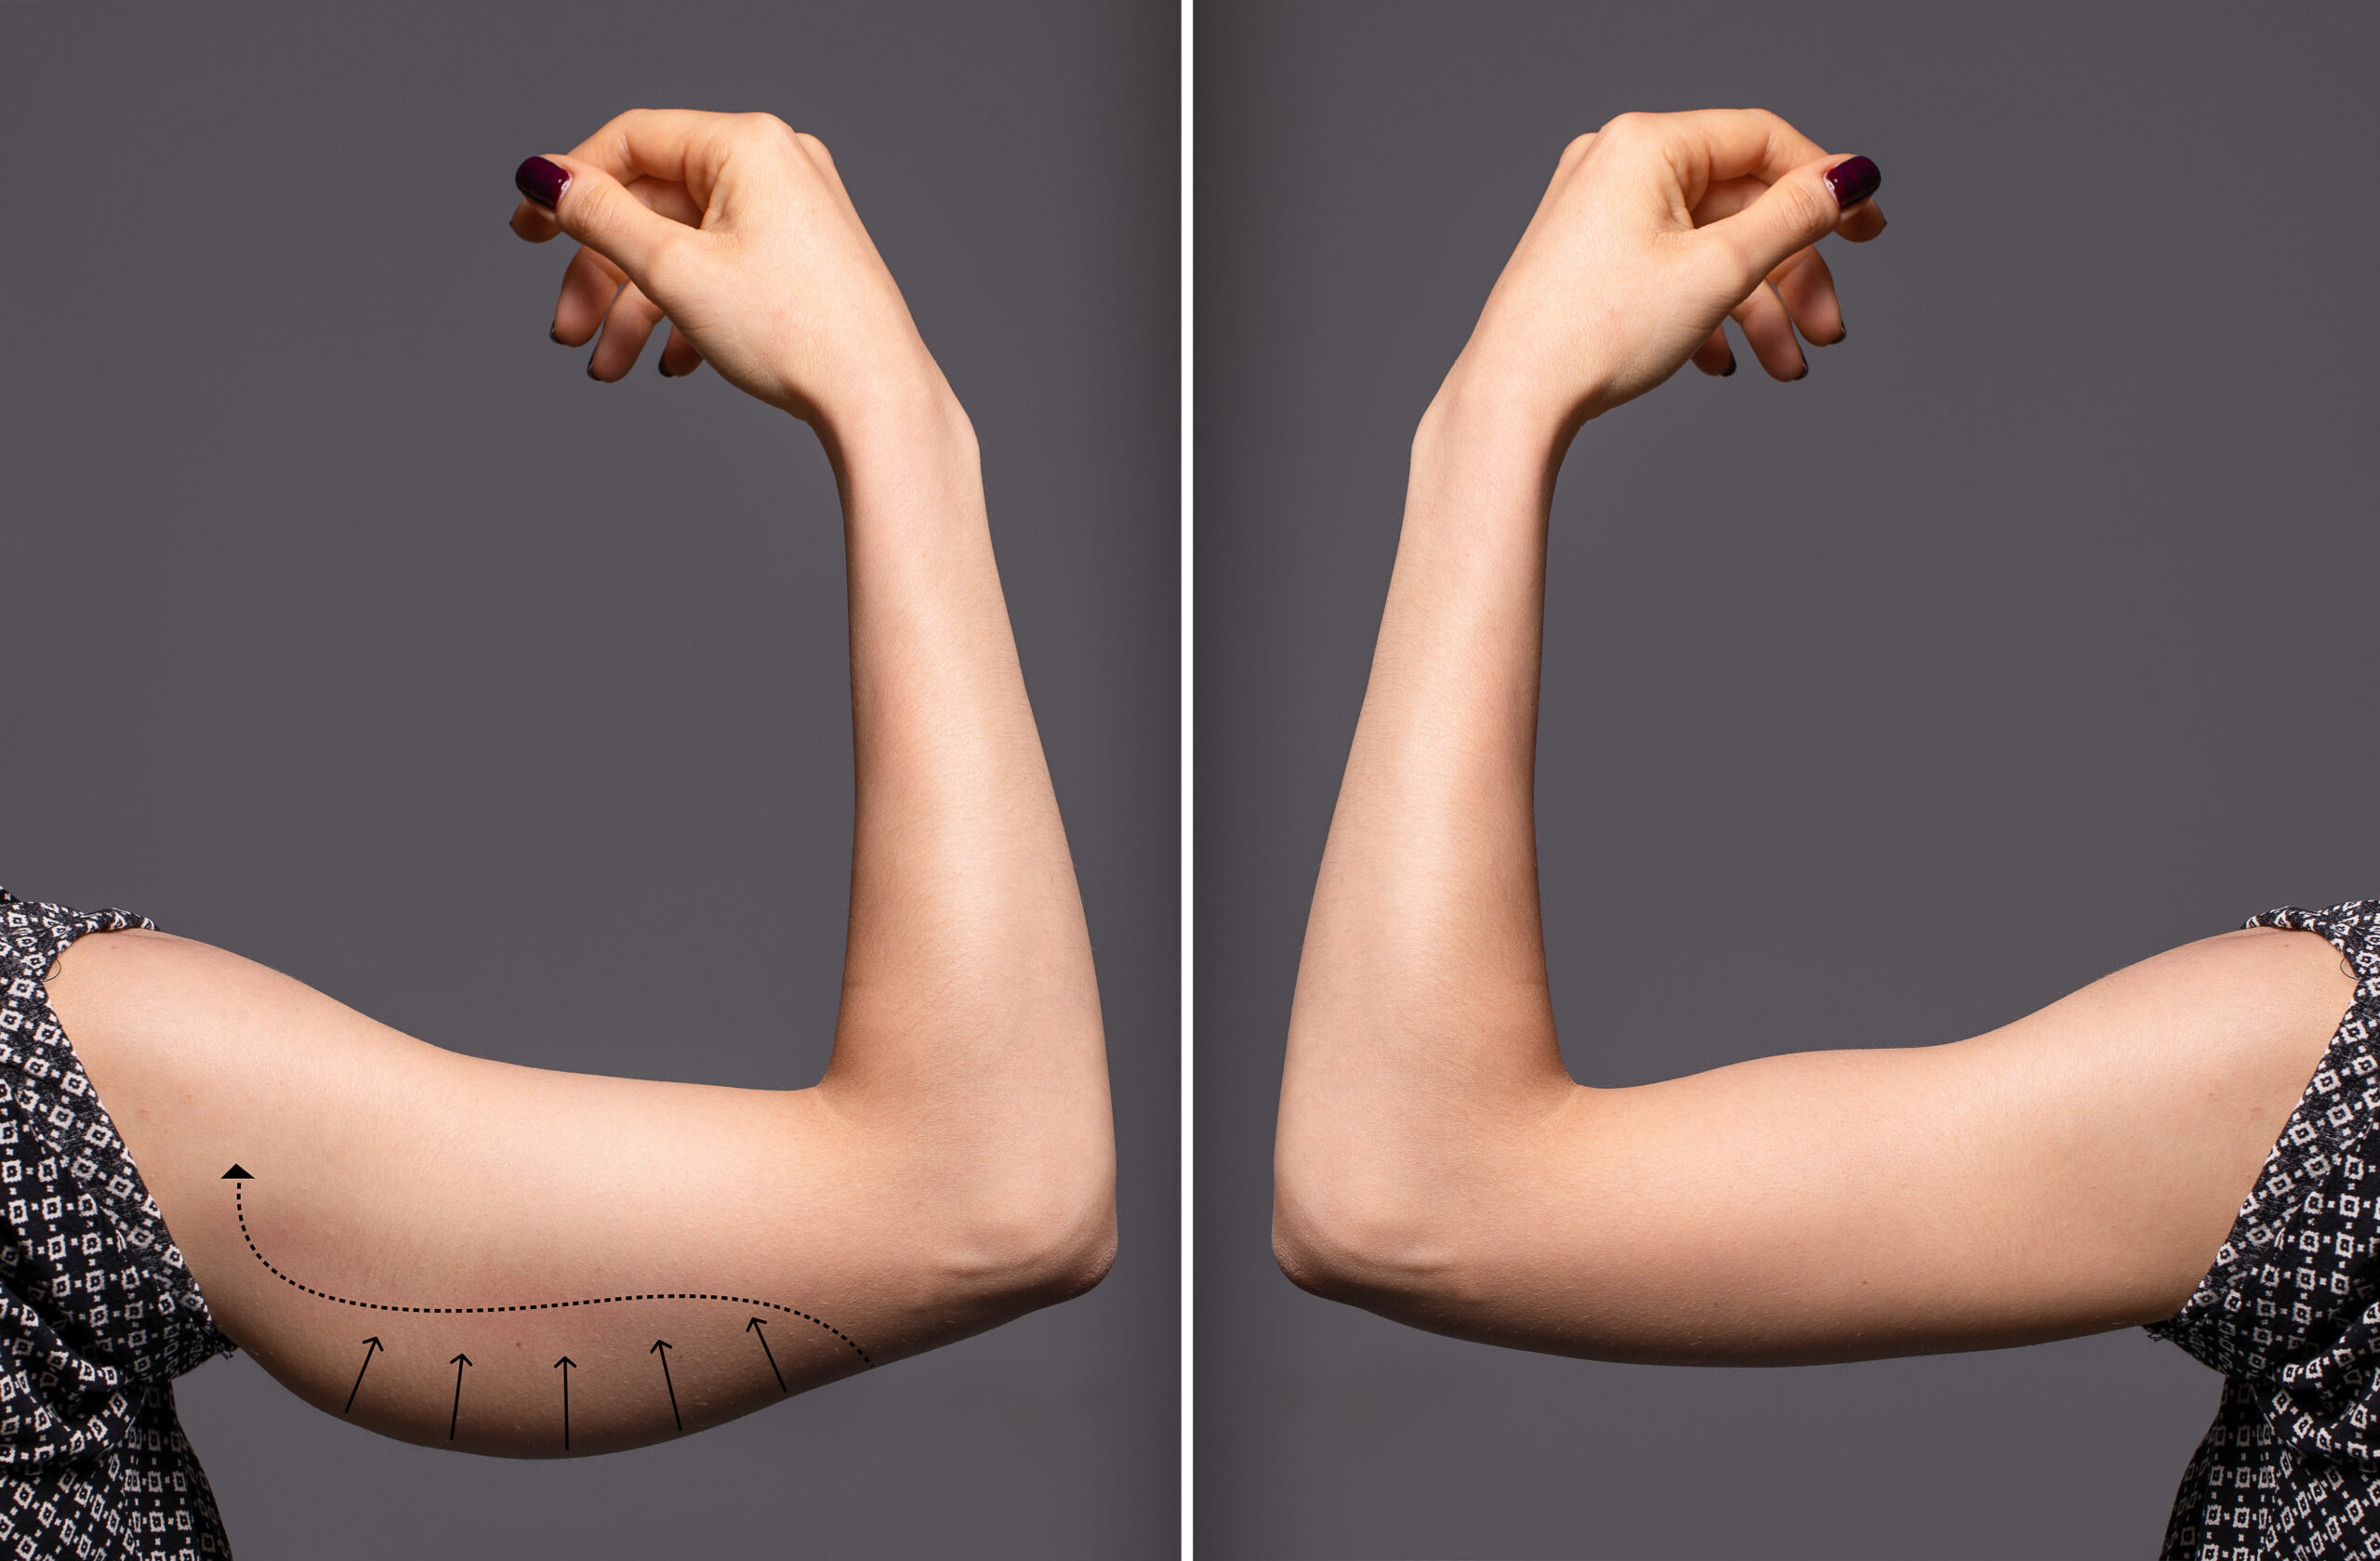 Woman arms with bat wings, comparison between before and after brachioplasty surgery